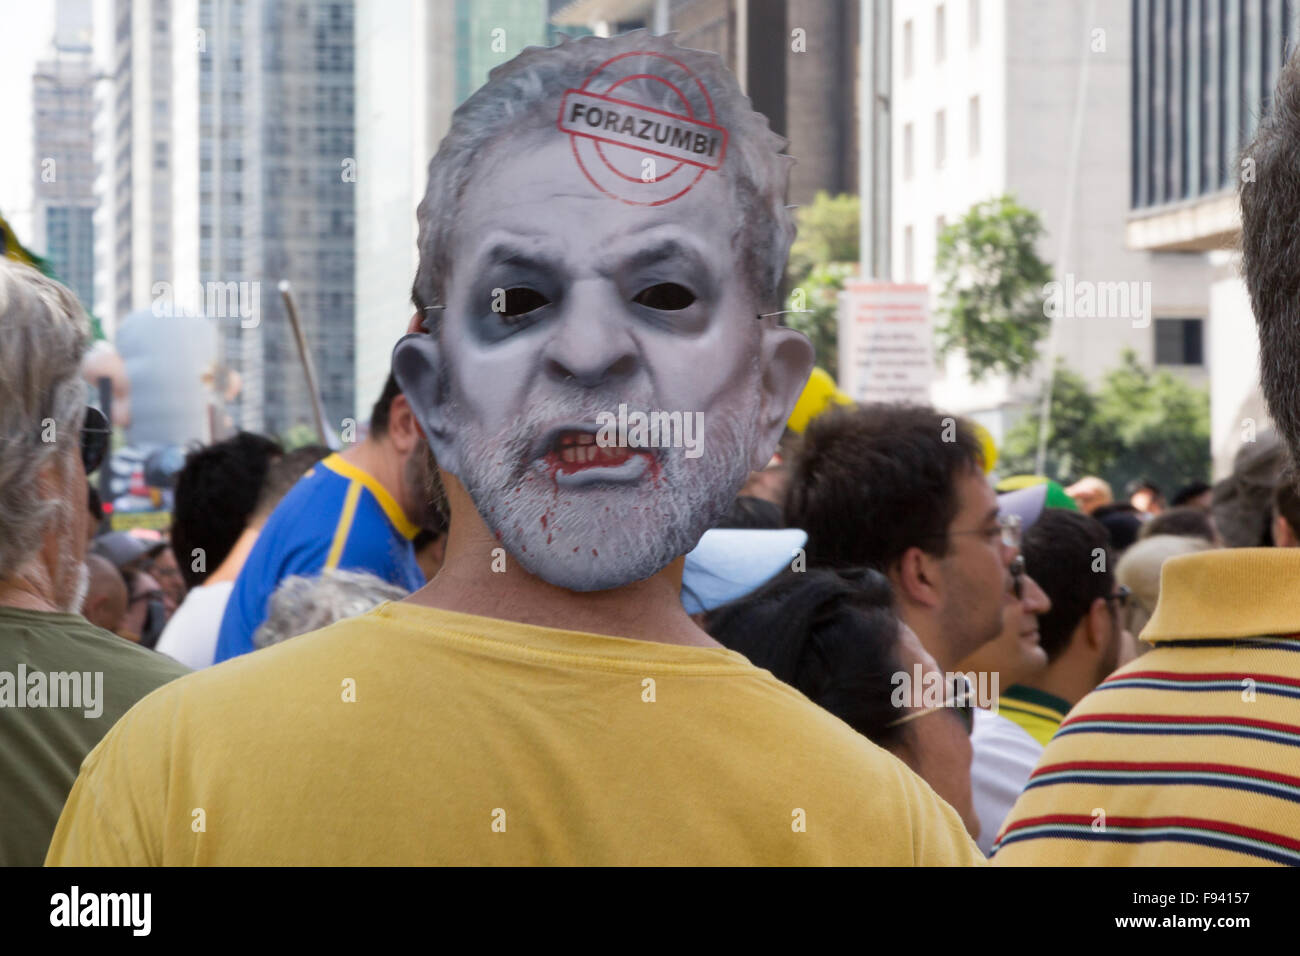 Sao Paulo, Brazil. 13th December, 2015. Demonstrator wears a mask depicting Brazil's former president Luiz Inacio Lula da Silva and a text written in Portuguese 'Fora Zumbi' (in English 'Out Zombie') is seen during a demonstration calling for the impeachment of Brazil's President Dilma Rousseff in Paulista avenue, Sao Paulo, Brazil. Credit: Andre M. Chang/Alamy Live News Stock Photo